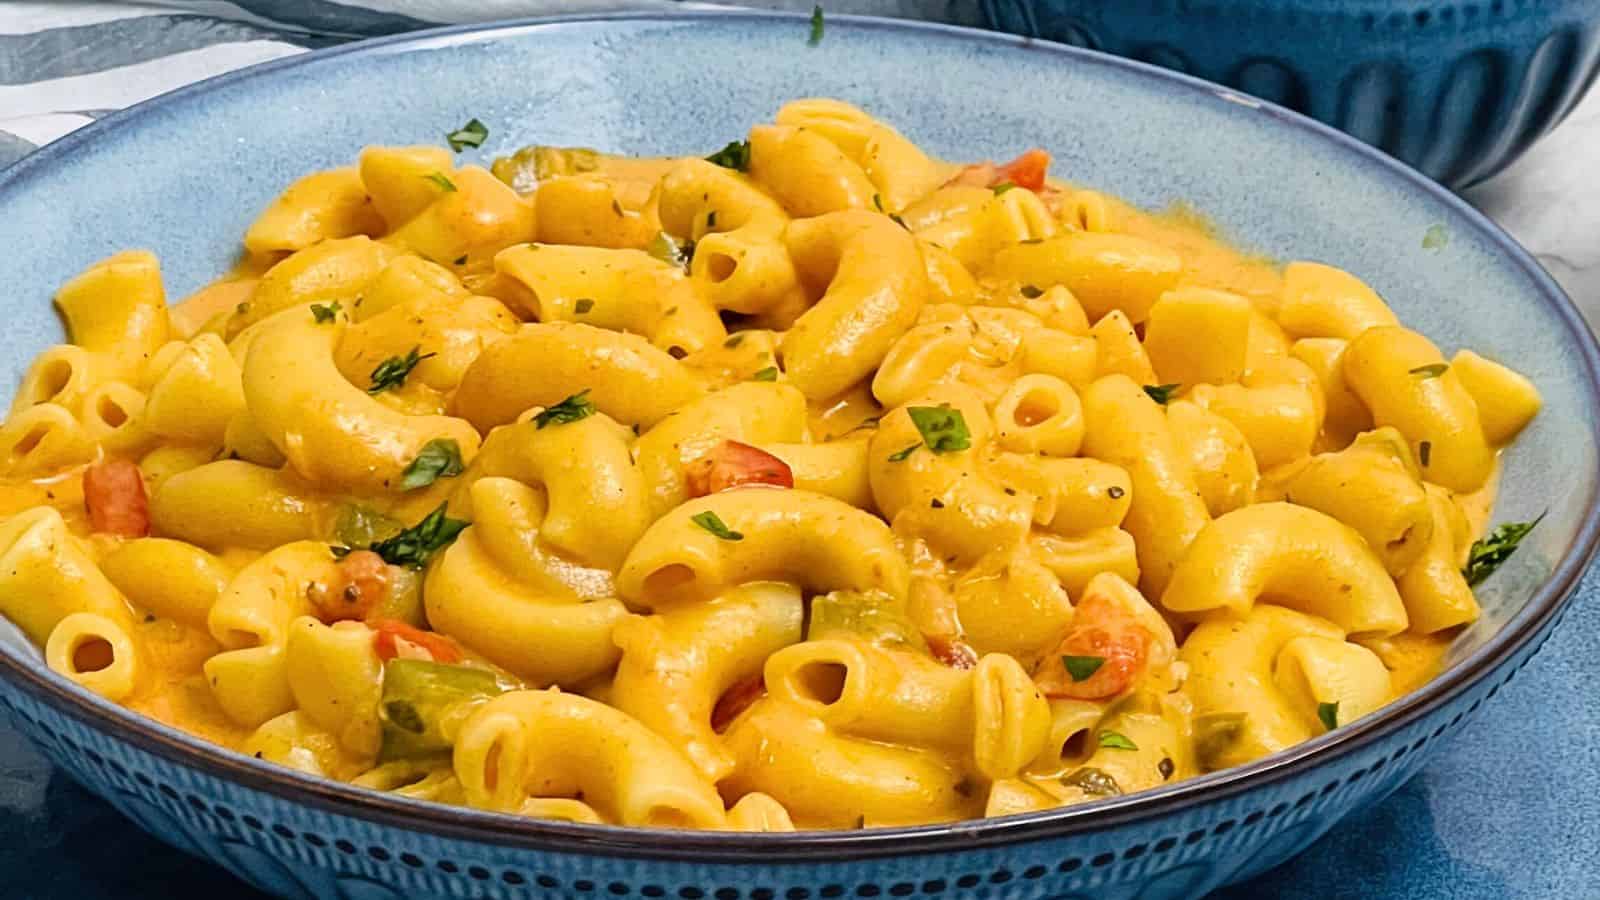 <p>Shake things up on pasta night with Masala Mac and Cheese. It's a bridge between two culinary worlds that needs to be tasted to be believed. It's one of the underrated Indian dishes that will make you rethink mac and cheese forever.<br><strong>Get the Recipe: </strong><a href="https://easyindiancookbook.com/masala-mac-and-cheese/?utm_source=msn&utm_medium=page&utm_campaign=msn">Masala Mac and Cheese</a></p>